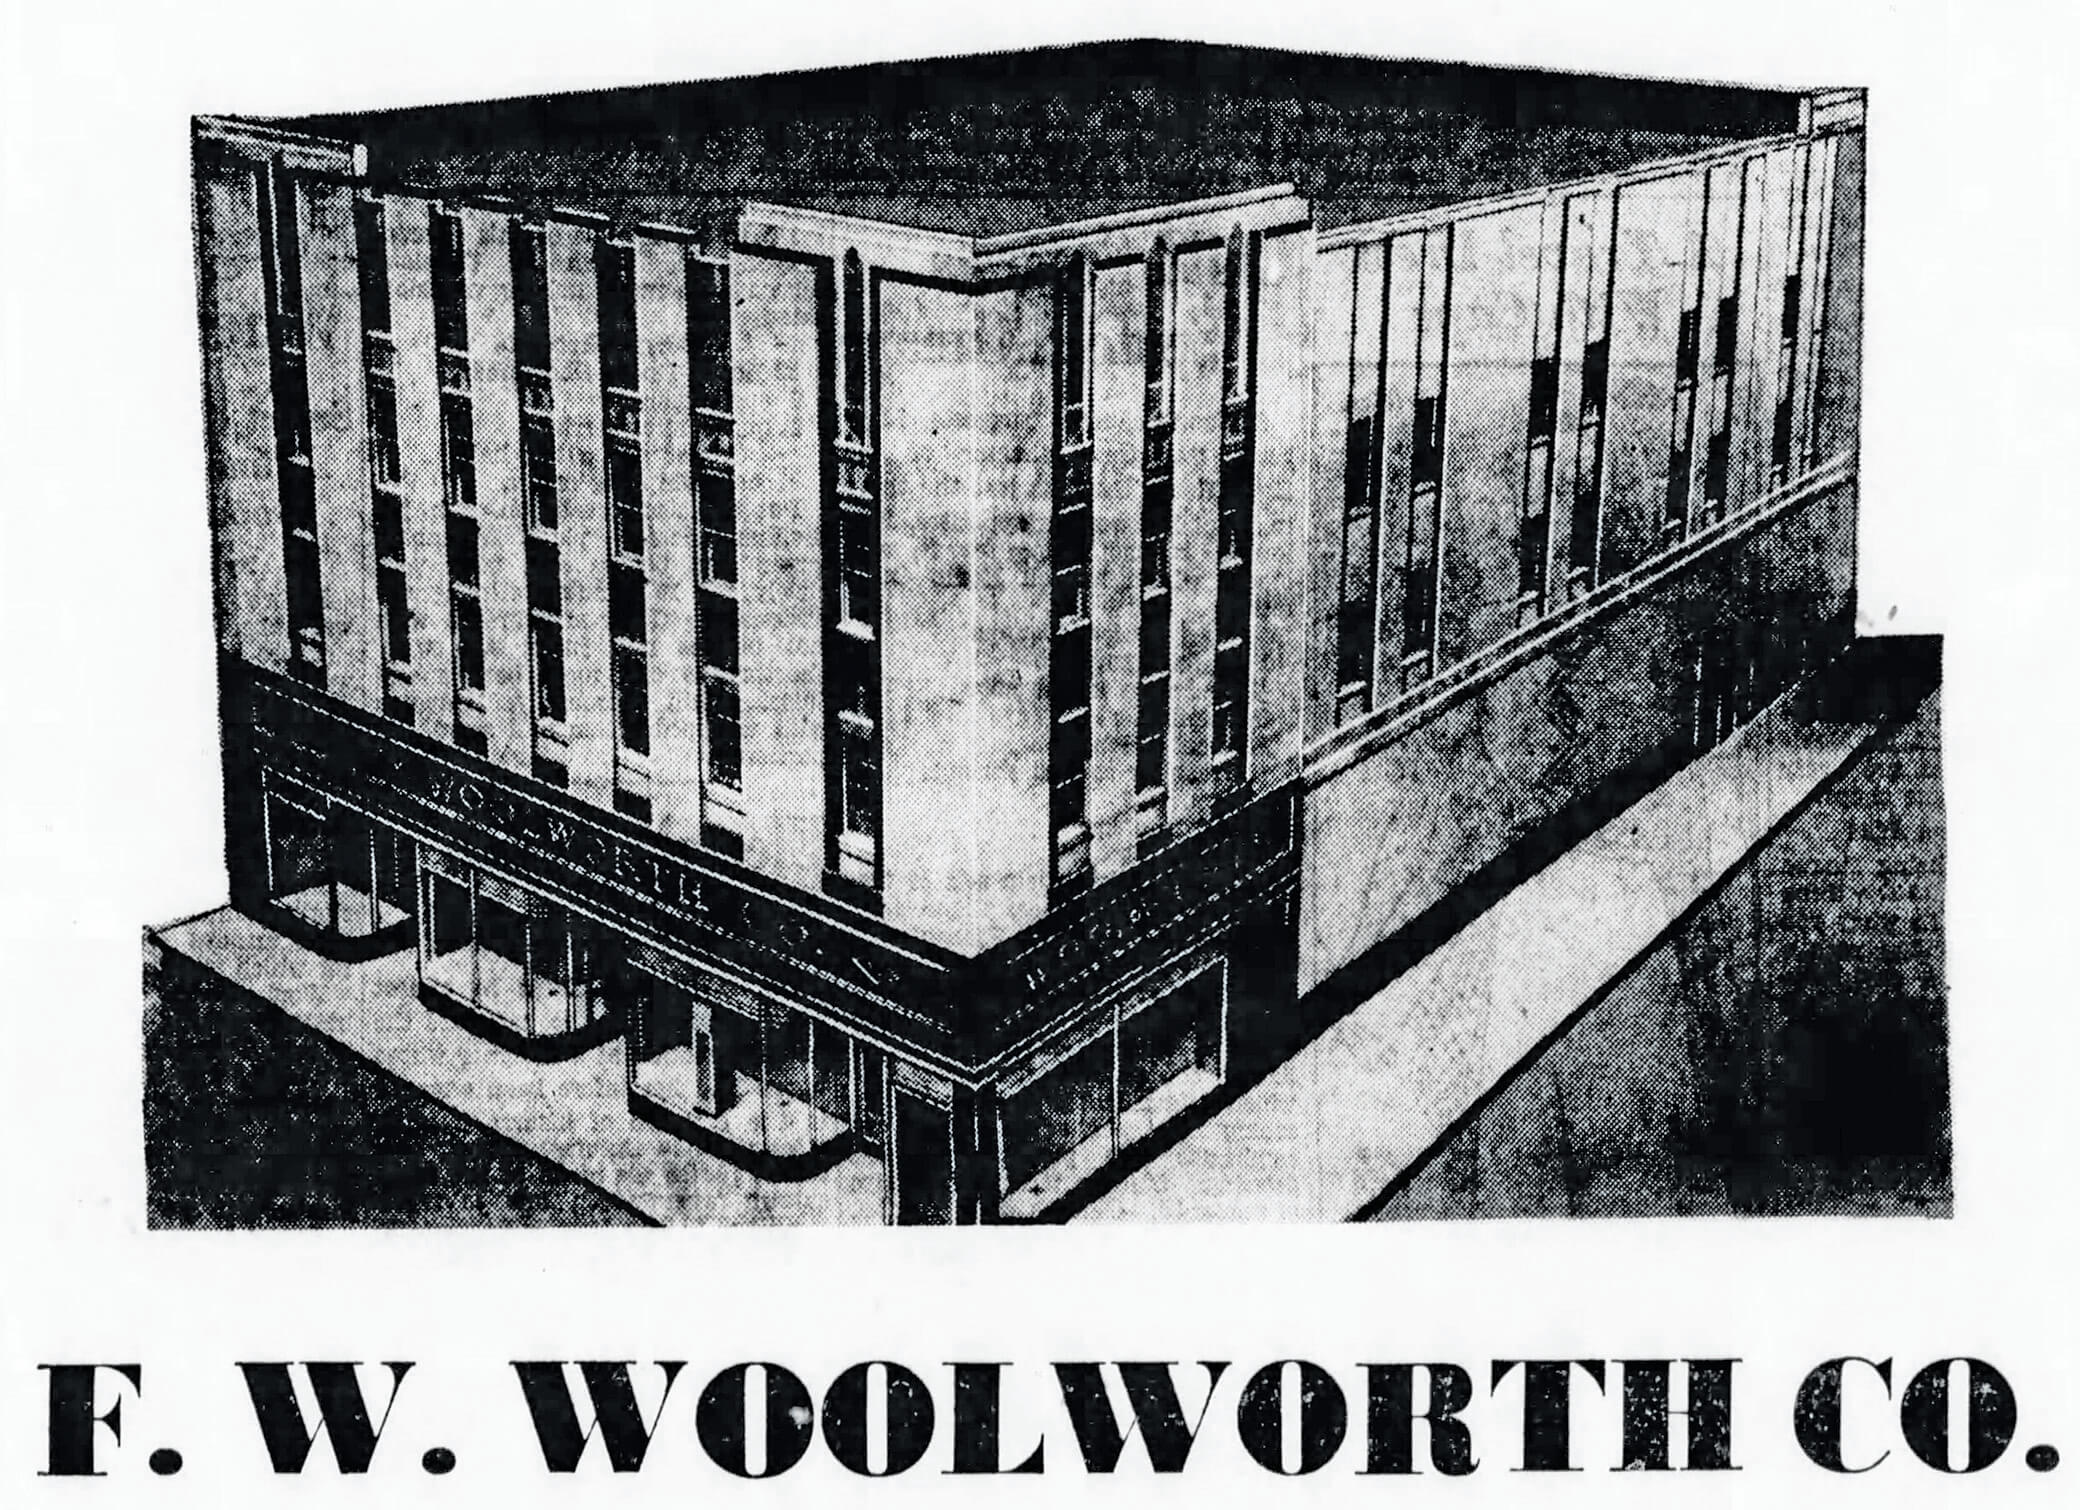 ad showing the exterior